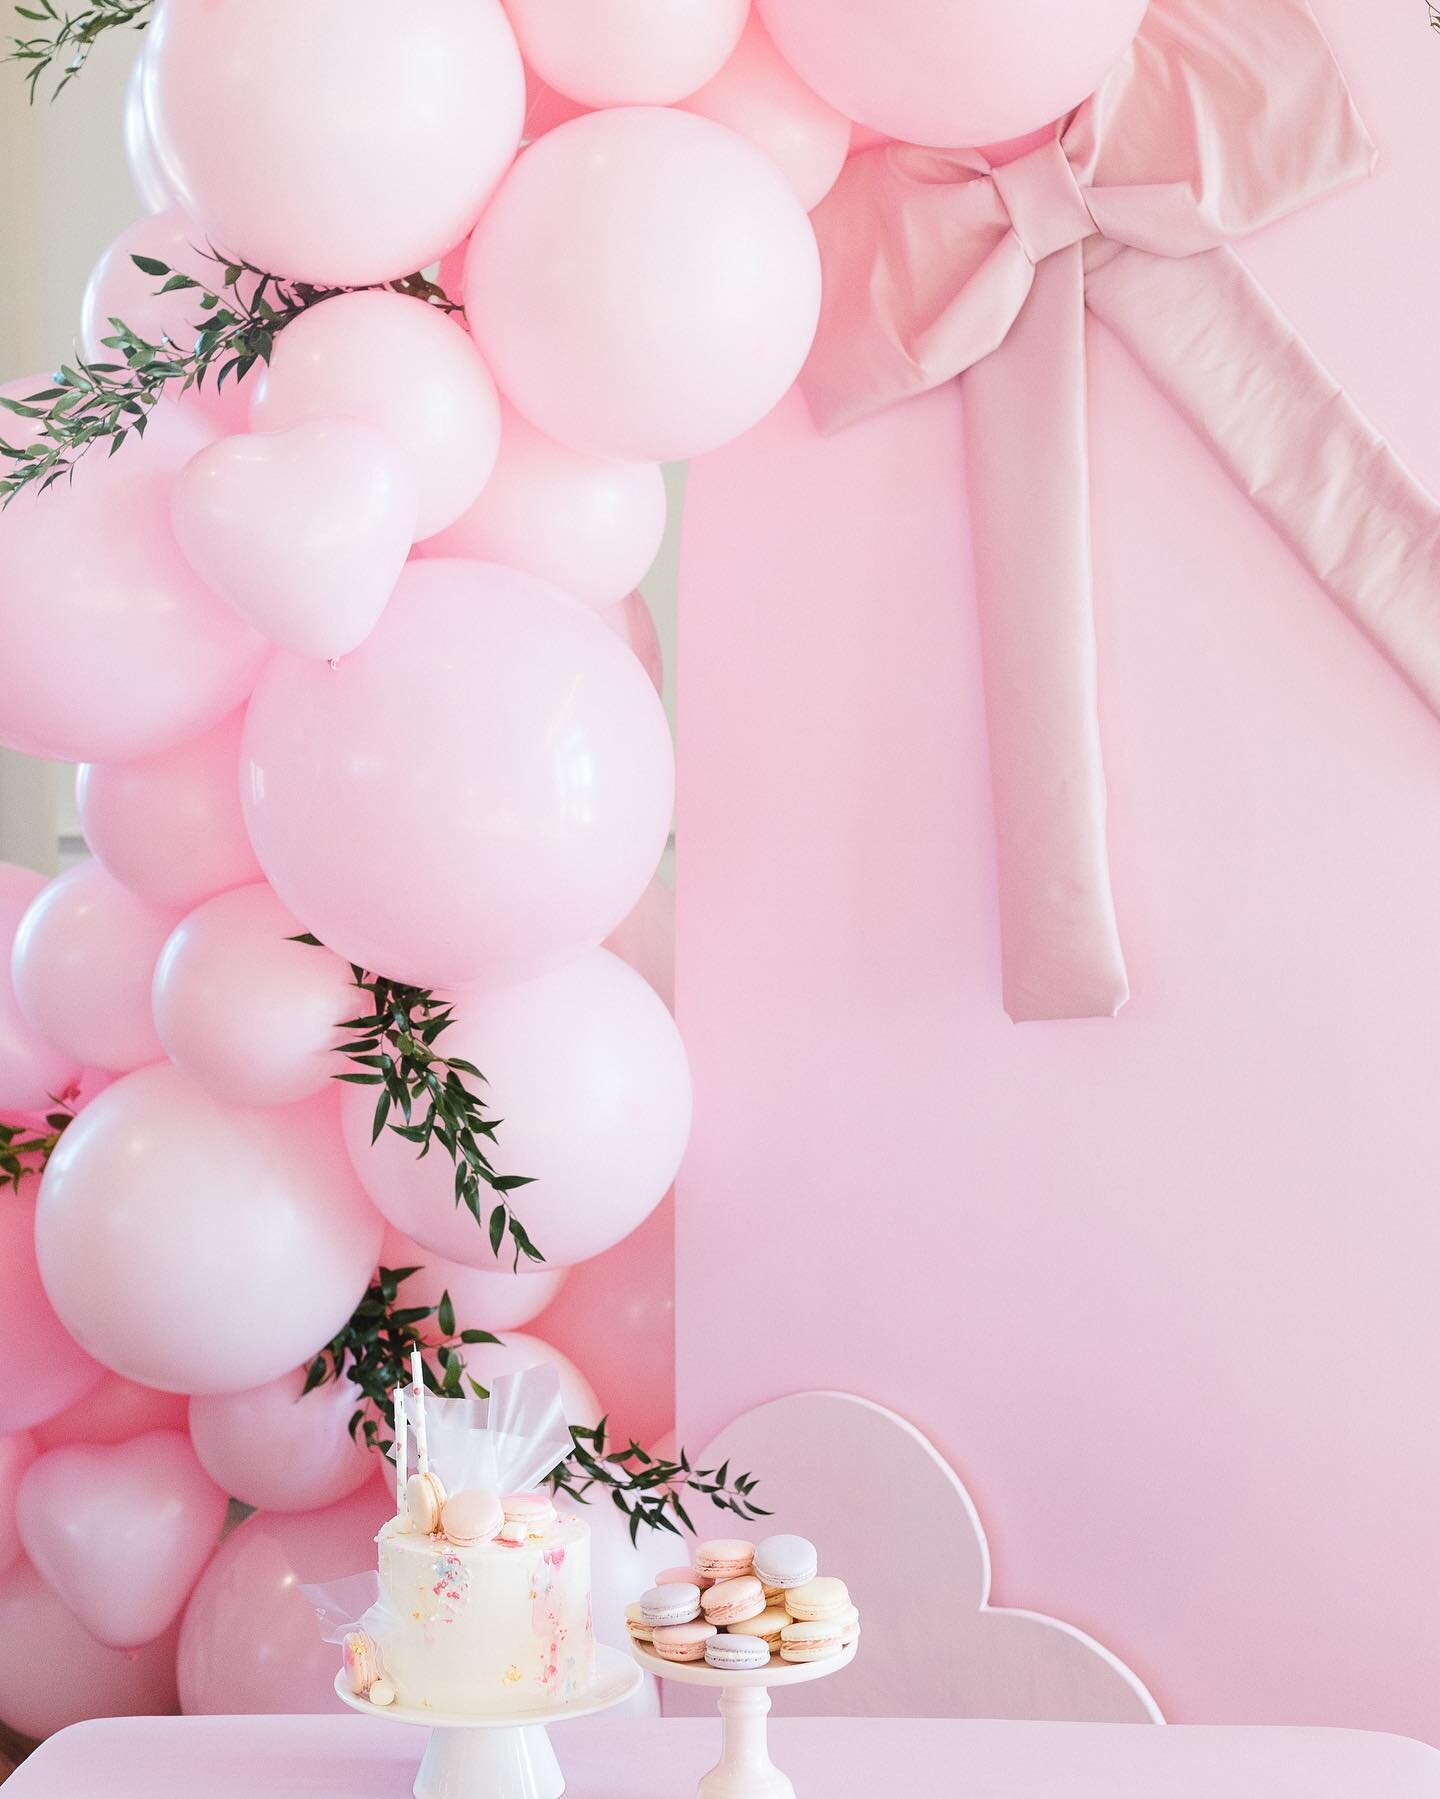 🎀All the pink to celebrate Valentines Day🎀

Balloons/Backdrop : @elderflower_design 
Planning : @partylittlethings 
Photo Credit : @katherine.mei.photo